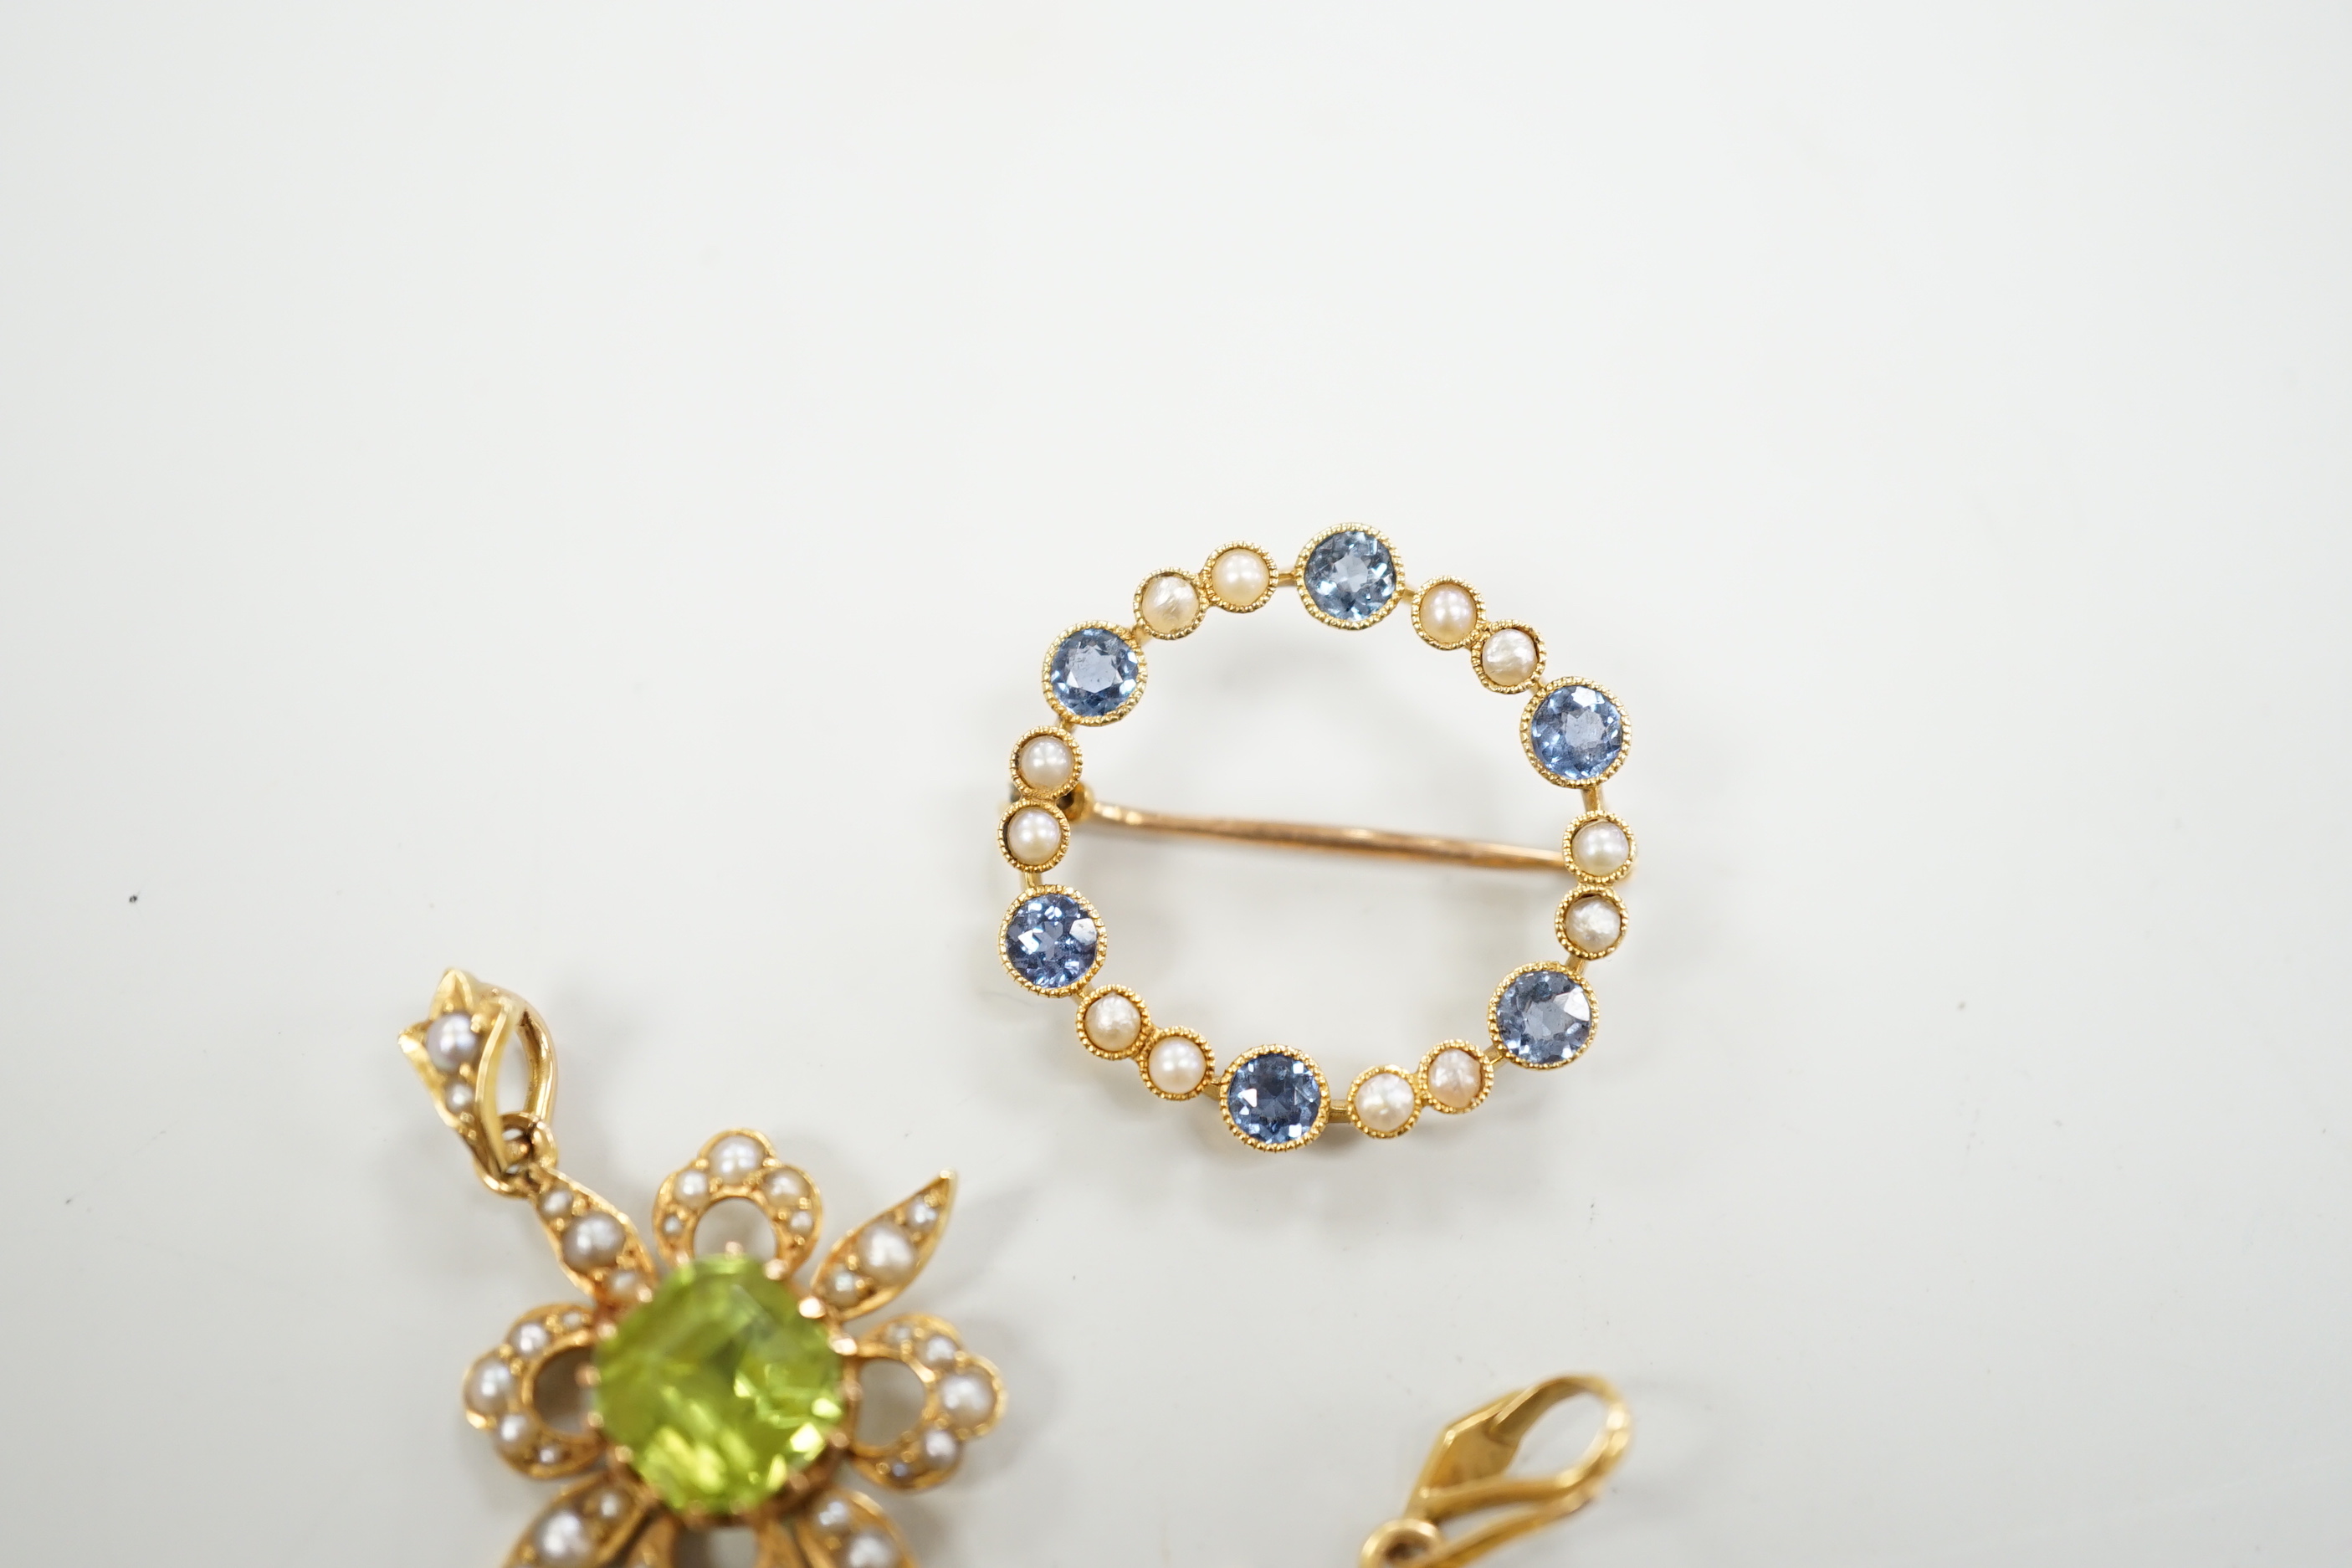 Two Edwardian 15ct and gem set pendants including peridot and seed pearl, 27mm and a similar 15ct and gem set open work circular brooch, gross weight 7 grams.